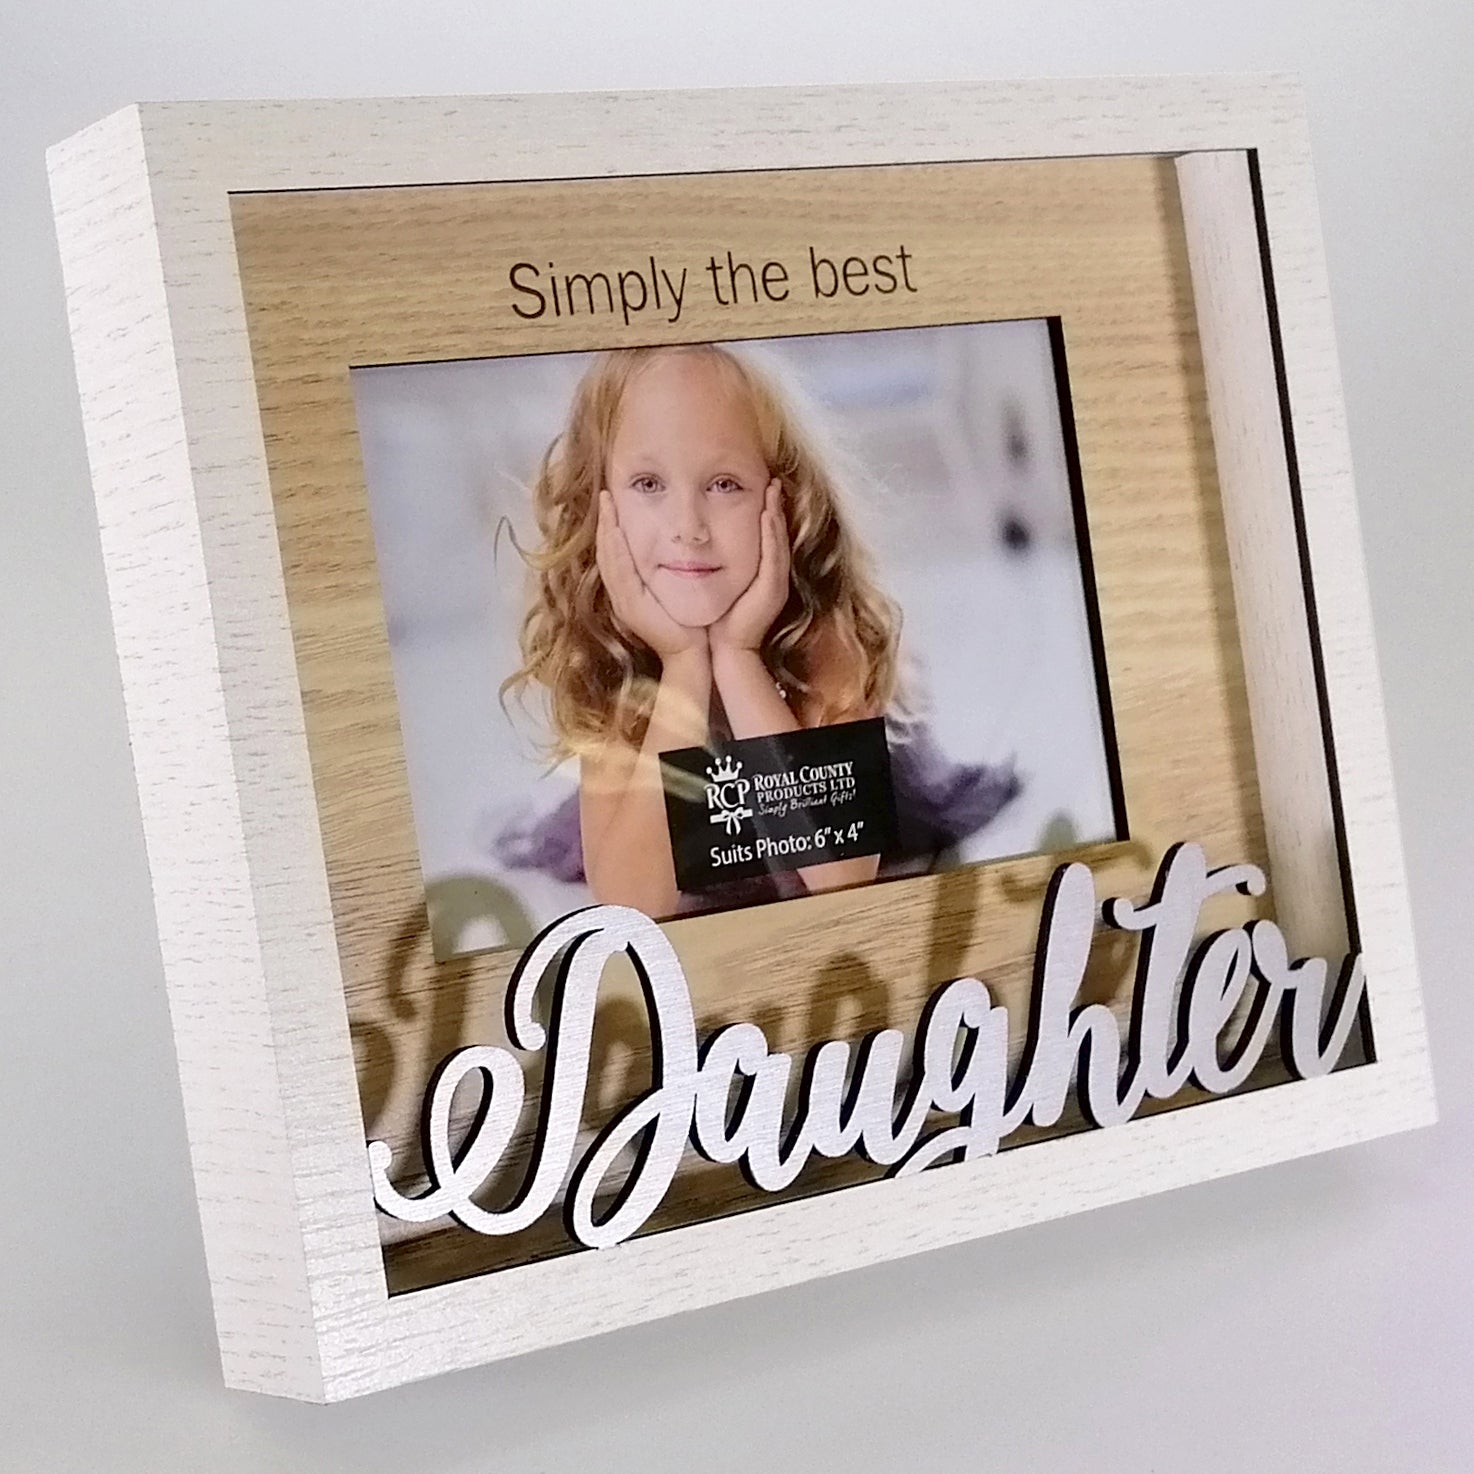 Simply the Best Frame 4"x 6" - Daughter